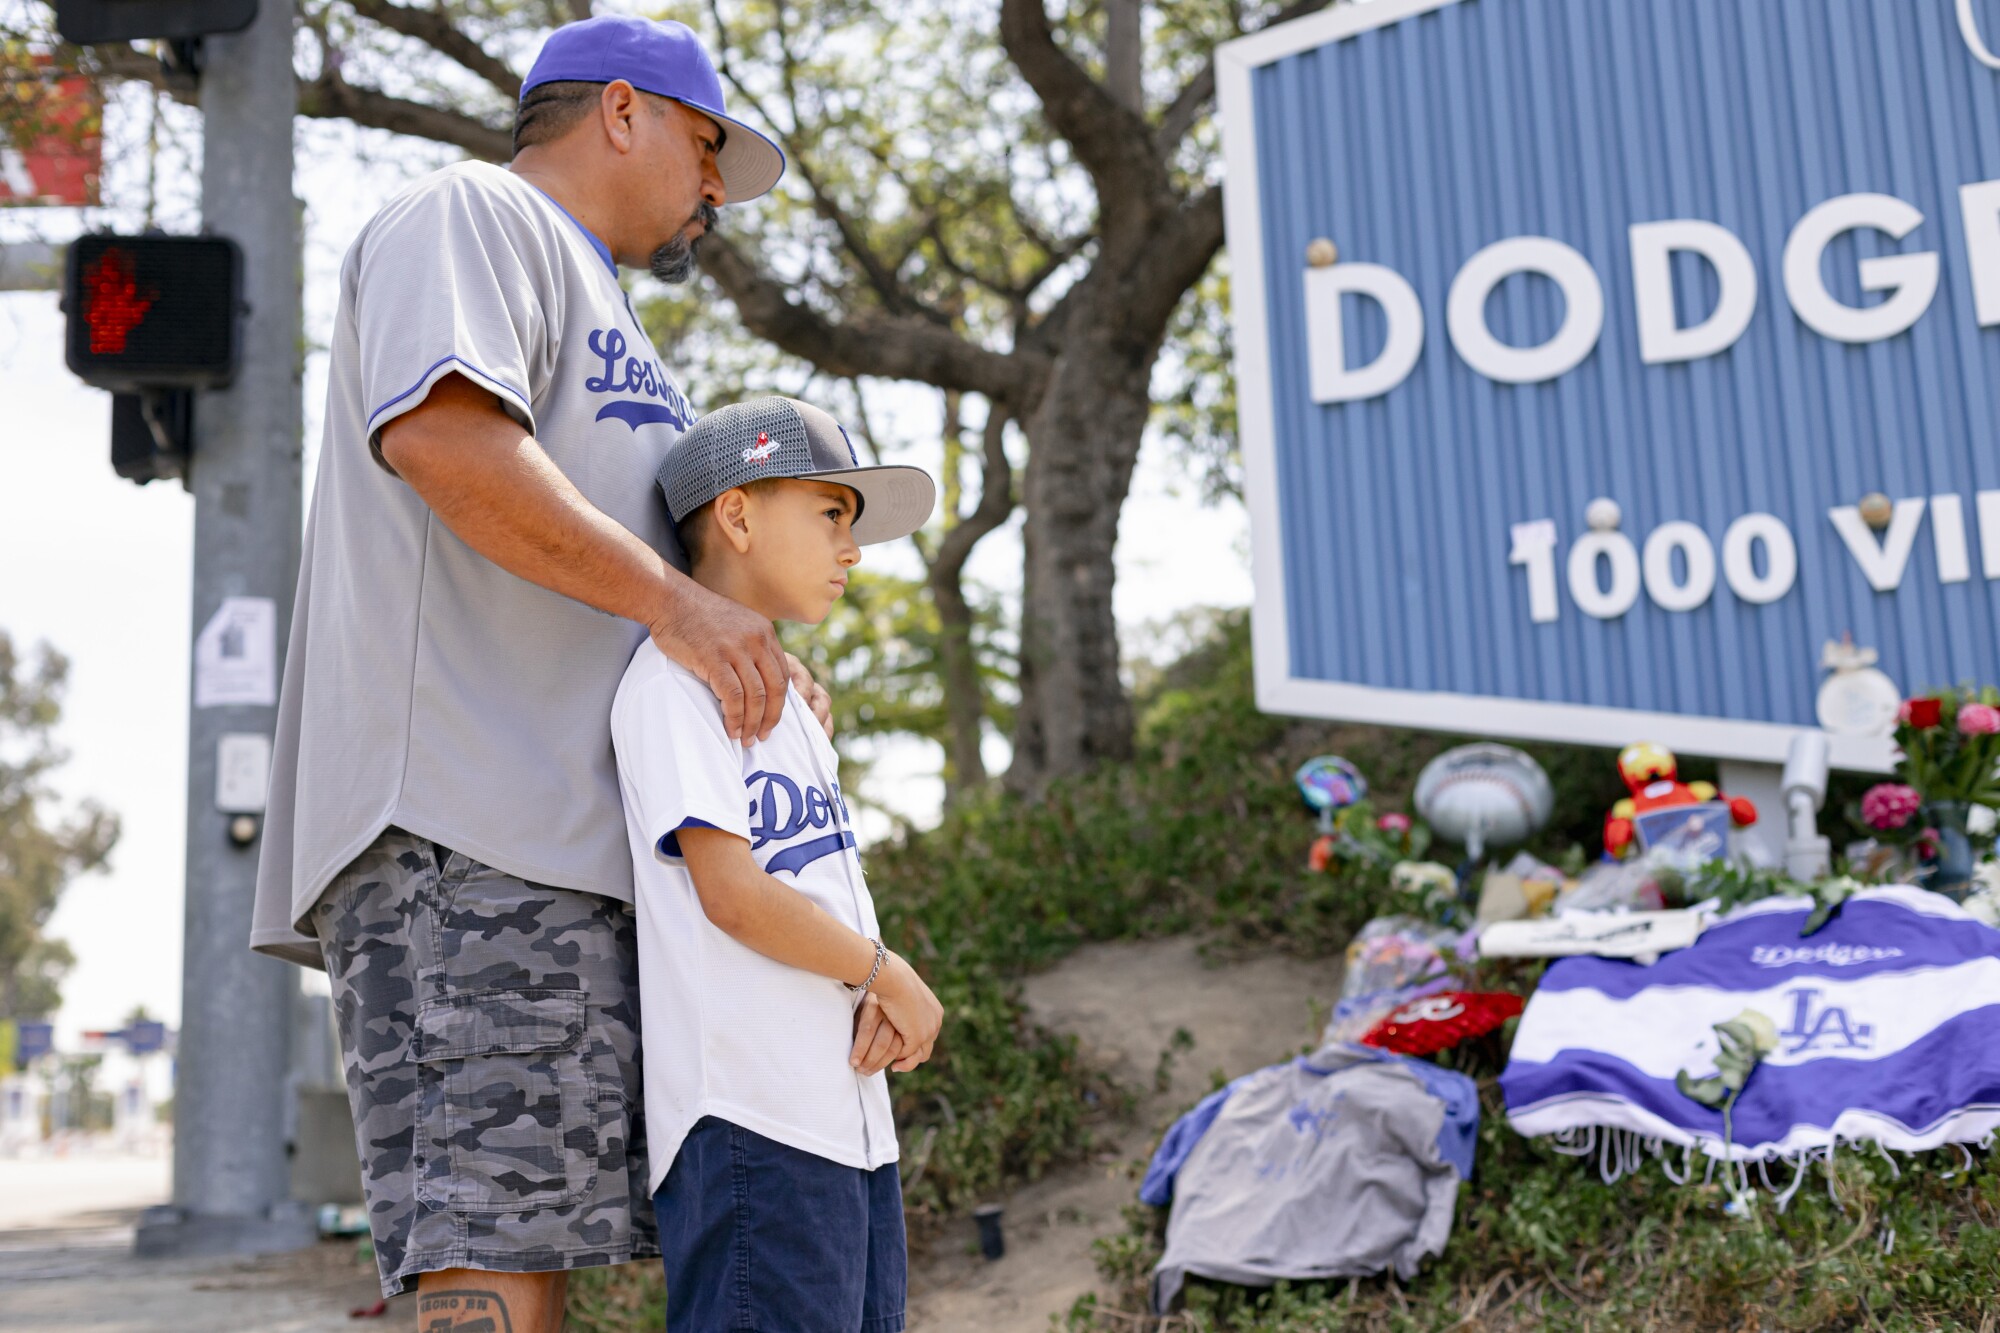 Rudy Escobar and Rudolfo Escobar look at the growing memorial for longtime beloved Dodgers announcer, Vin Scully.